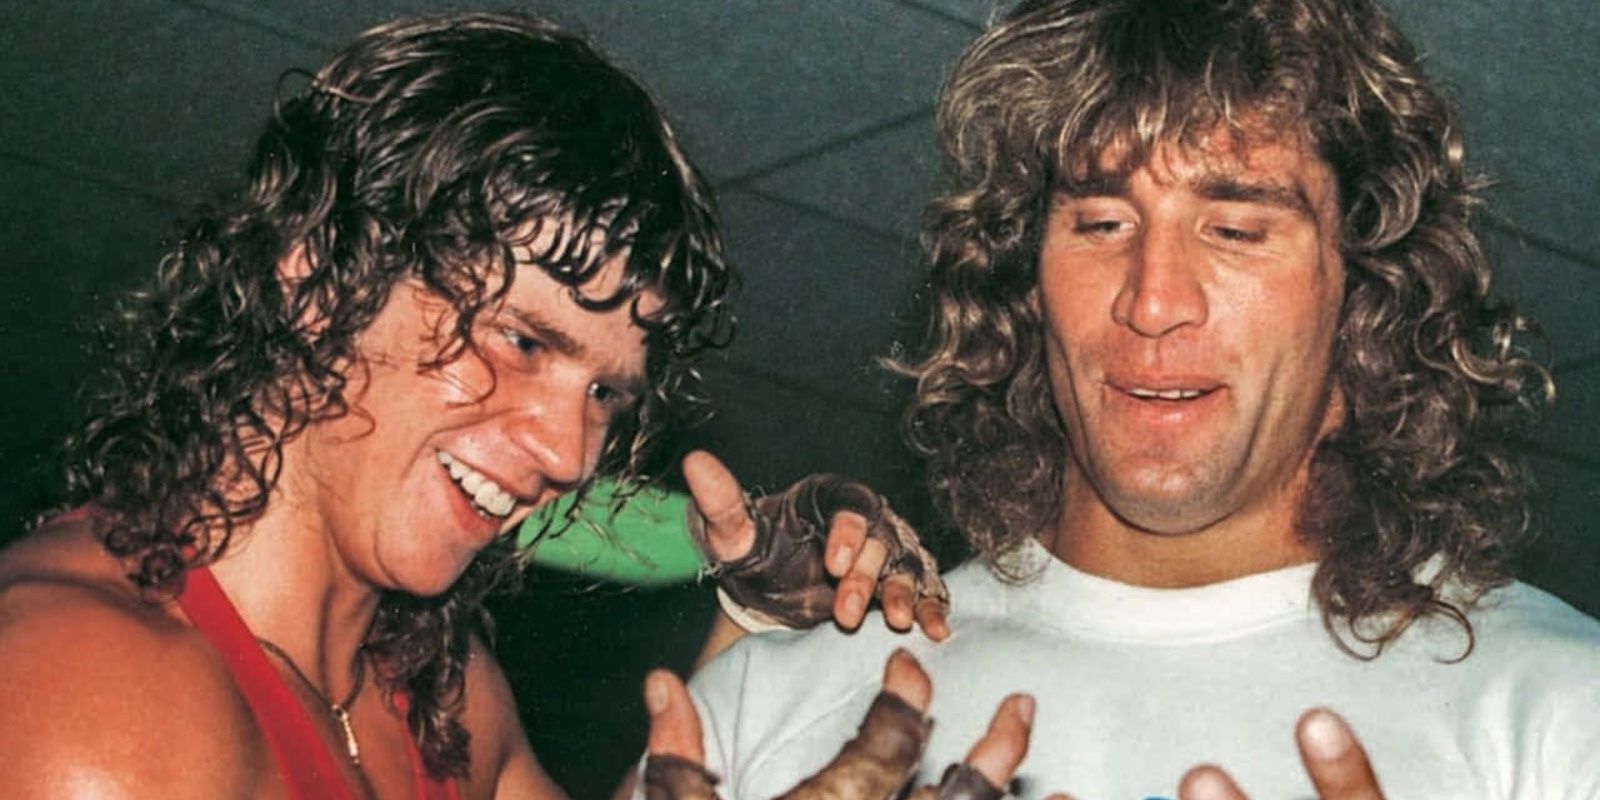 A photo of Chris and Kerry Von Erich featured in the Vice docuseries Dark Side Of The Ring.